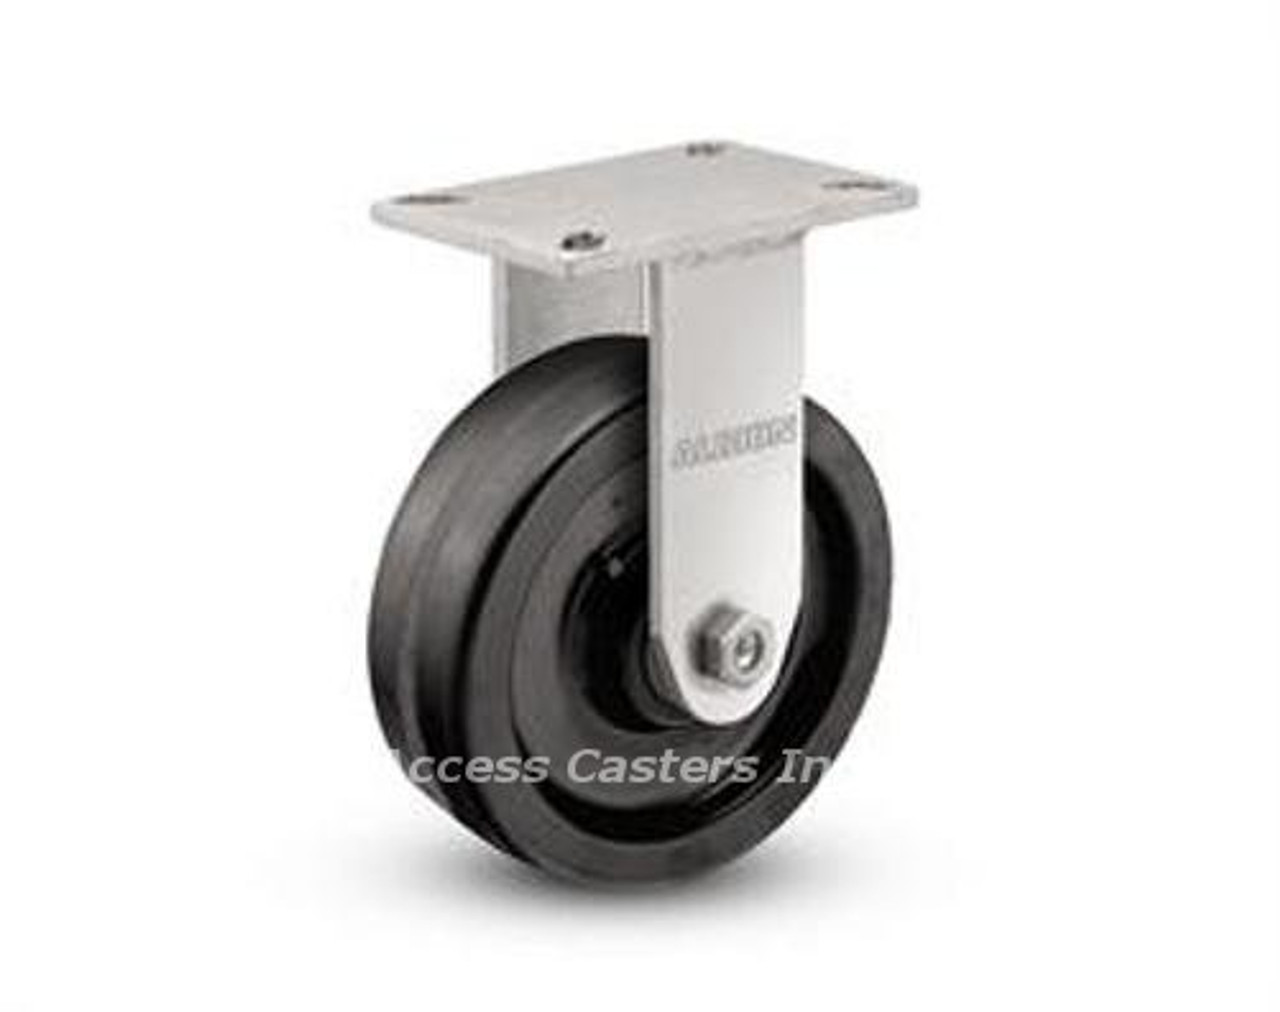 Picture shows caster with 10" x 3" wheel